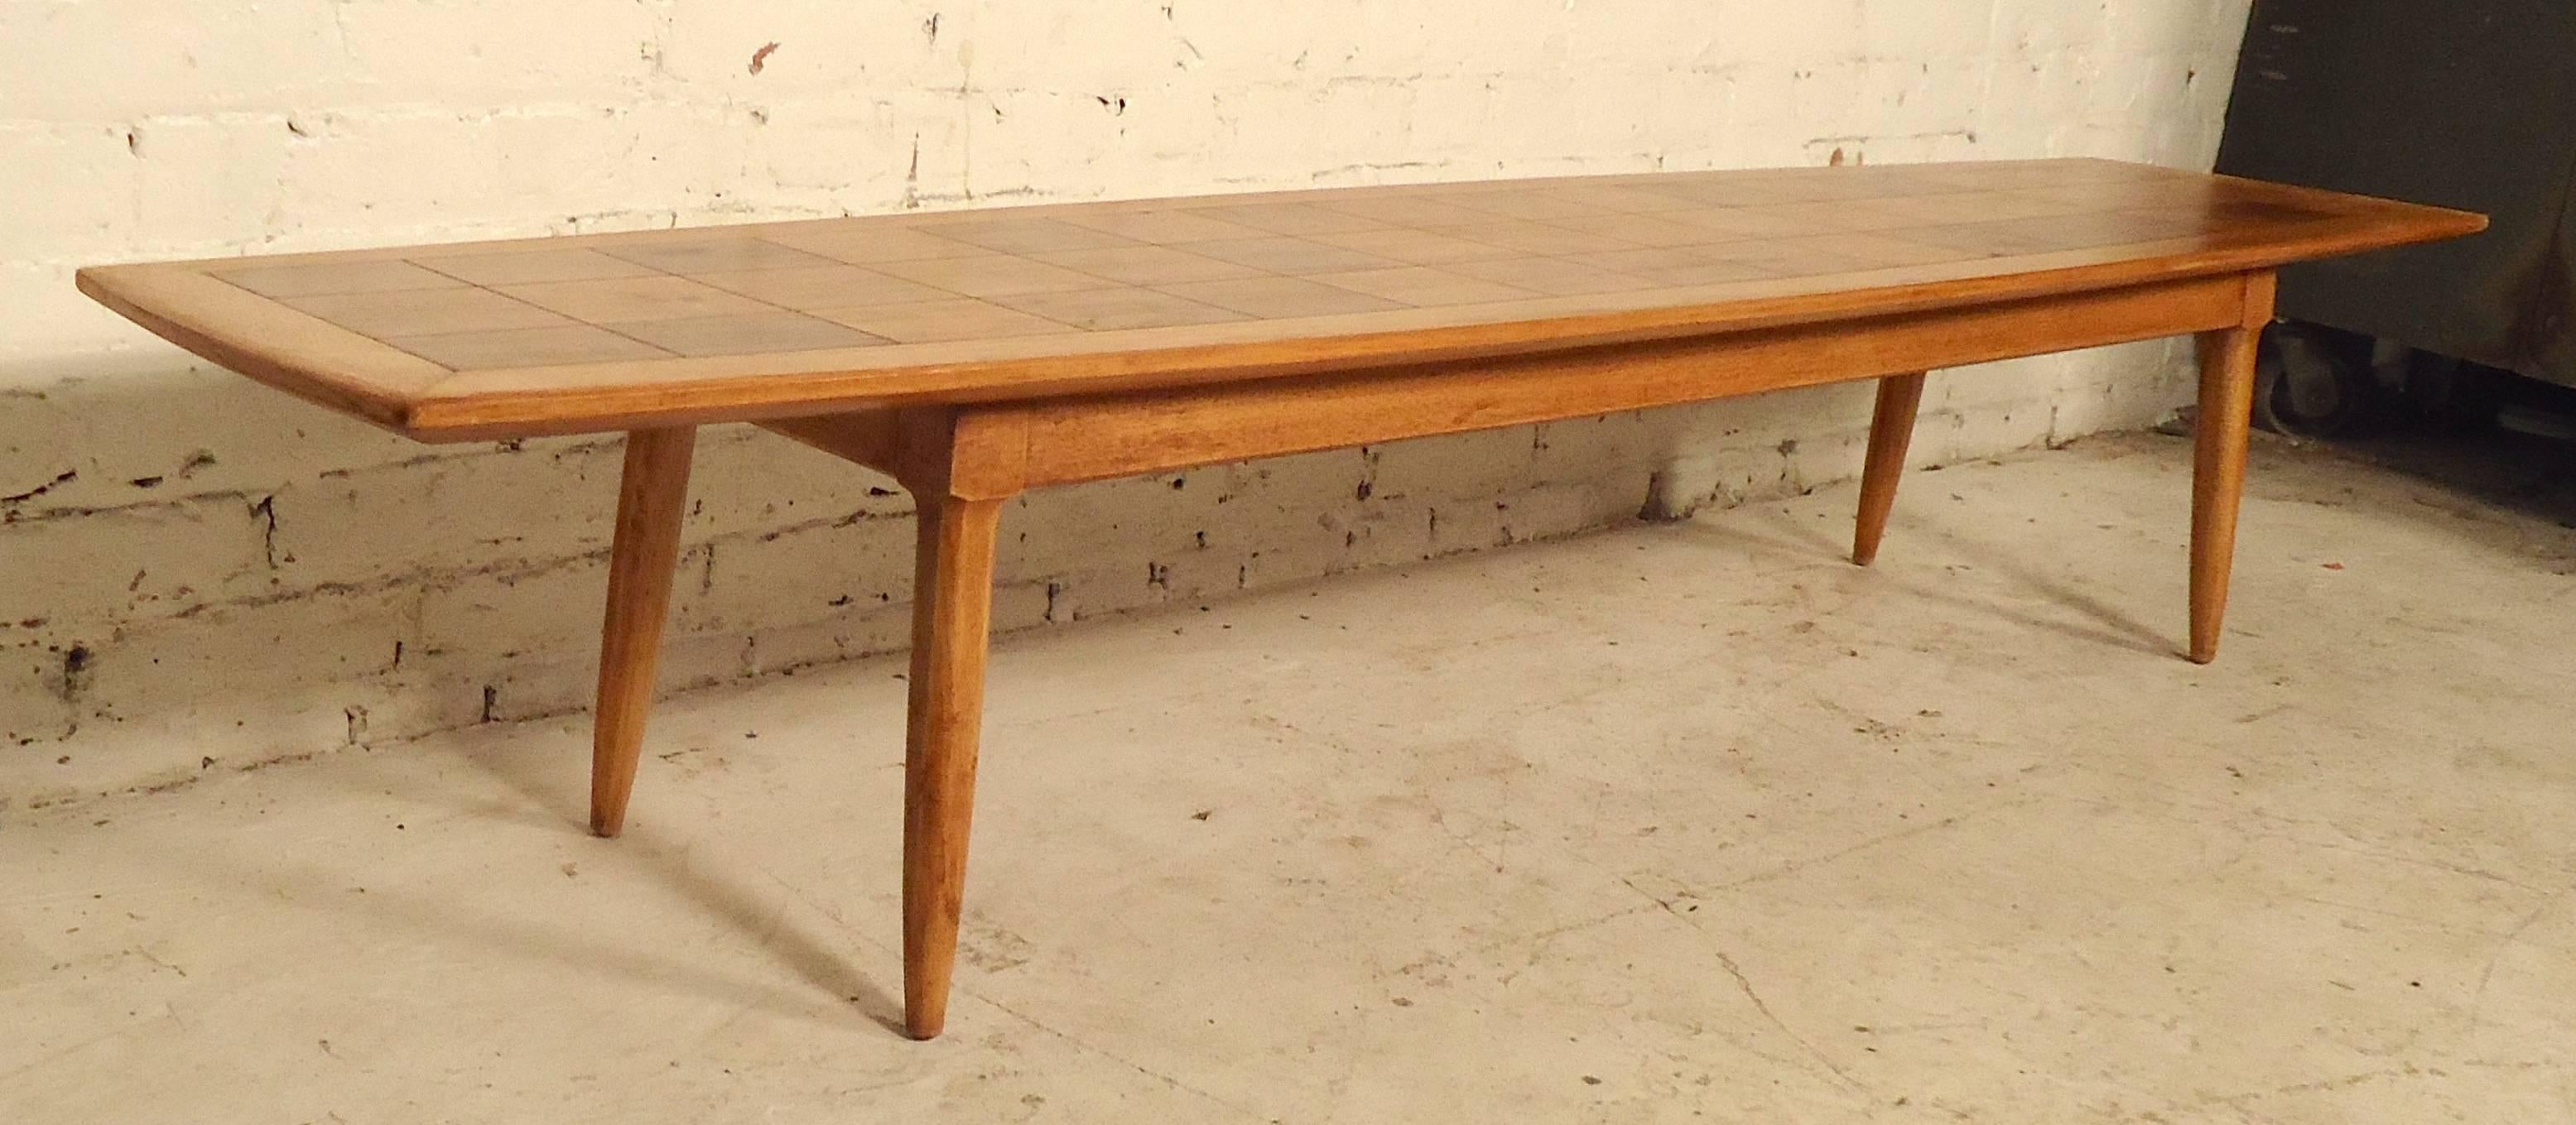 Beautiful Mid-Century Modern table by Tomlinson, with a blonde color grain and bird's-eye checkerboard top.

(Please confirm item location, NY or NJ, with dealer).
 